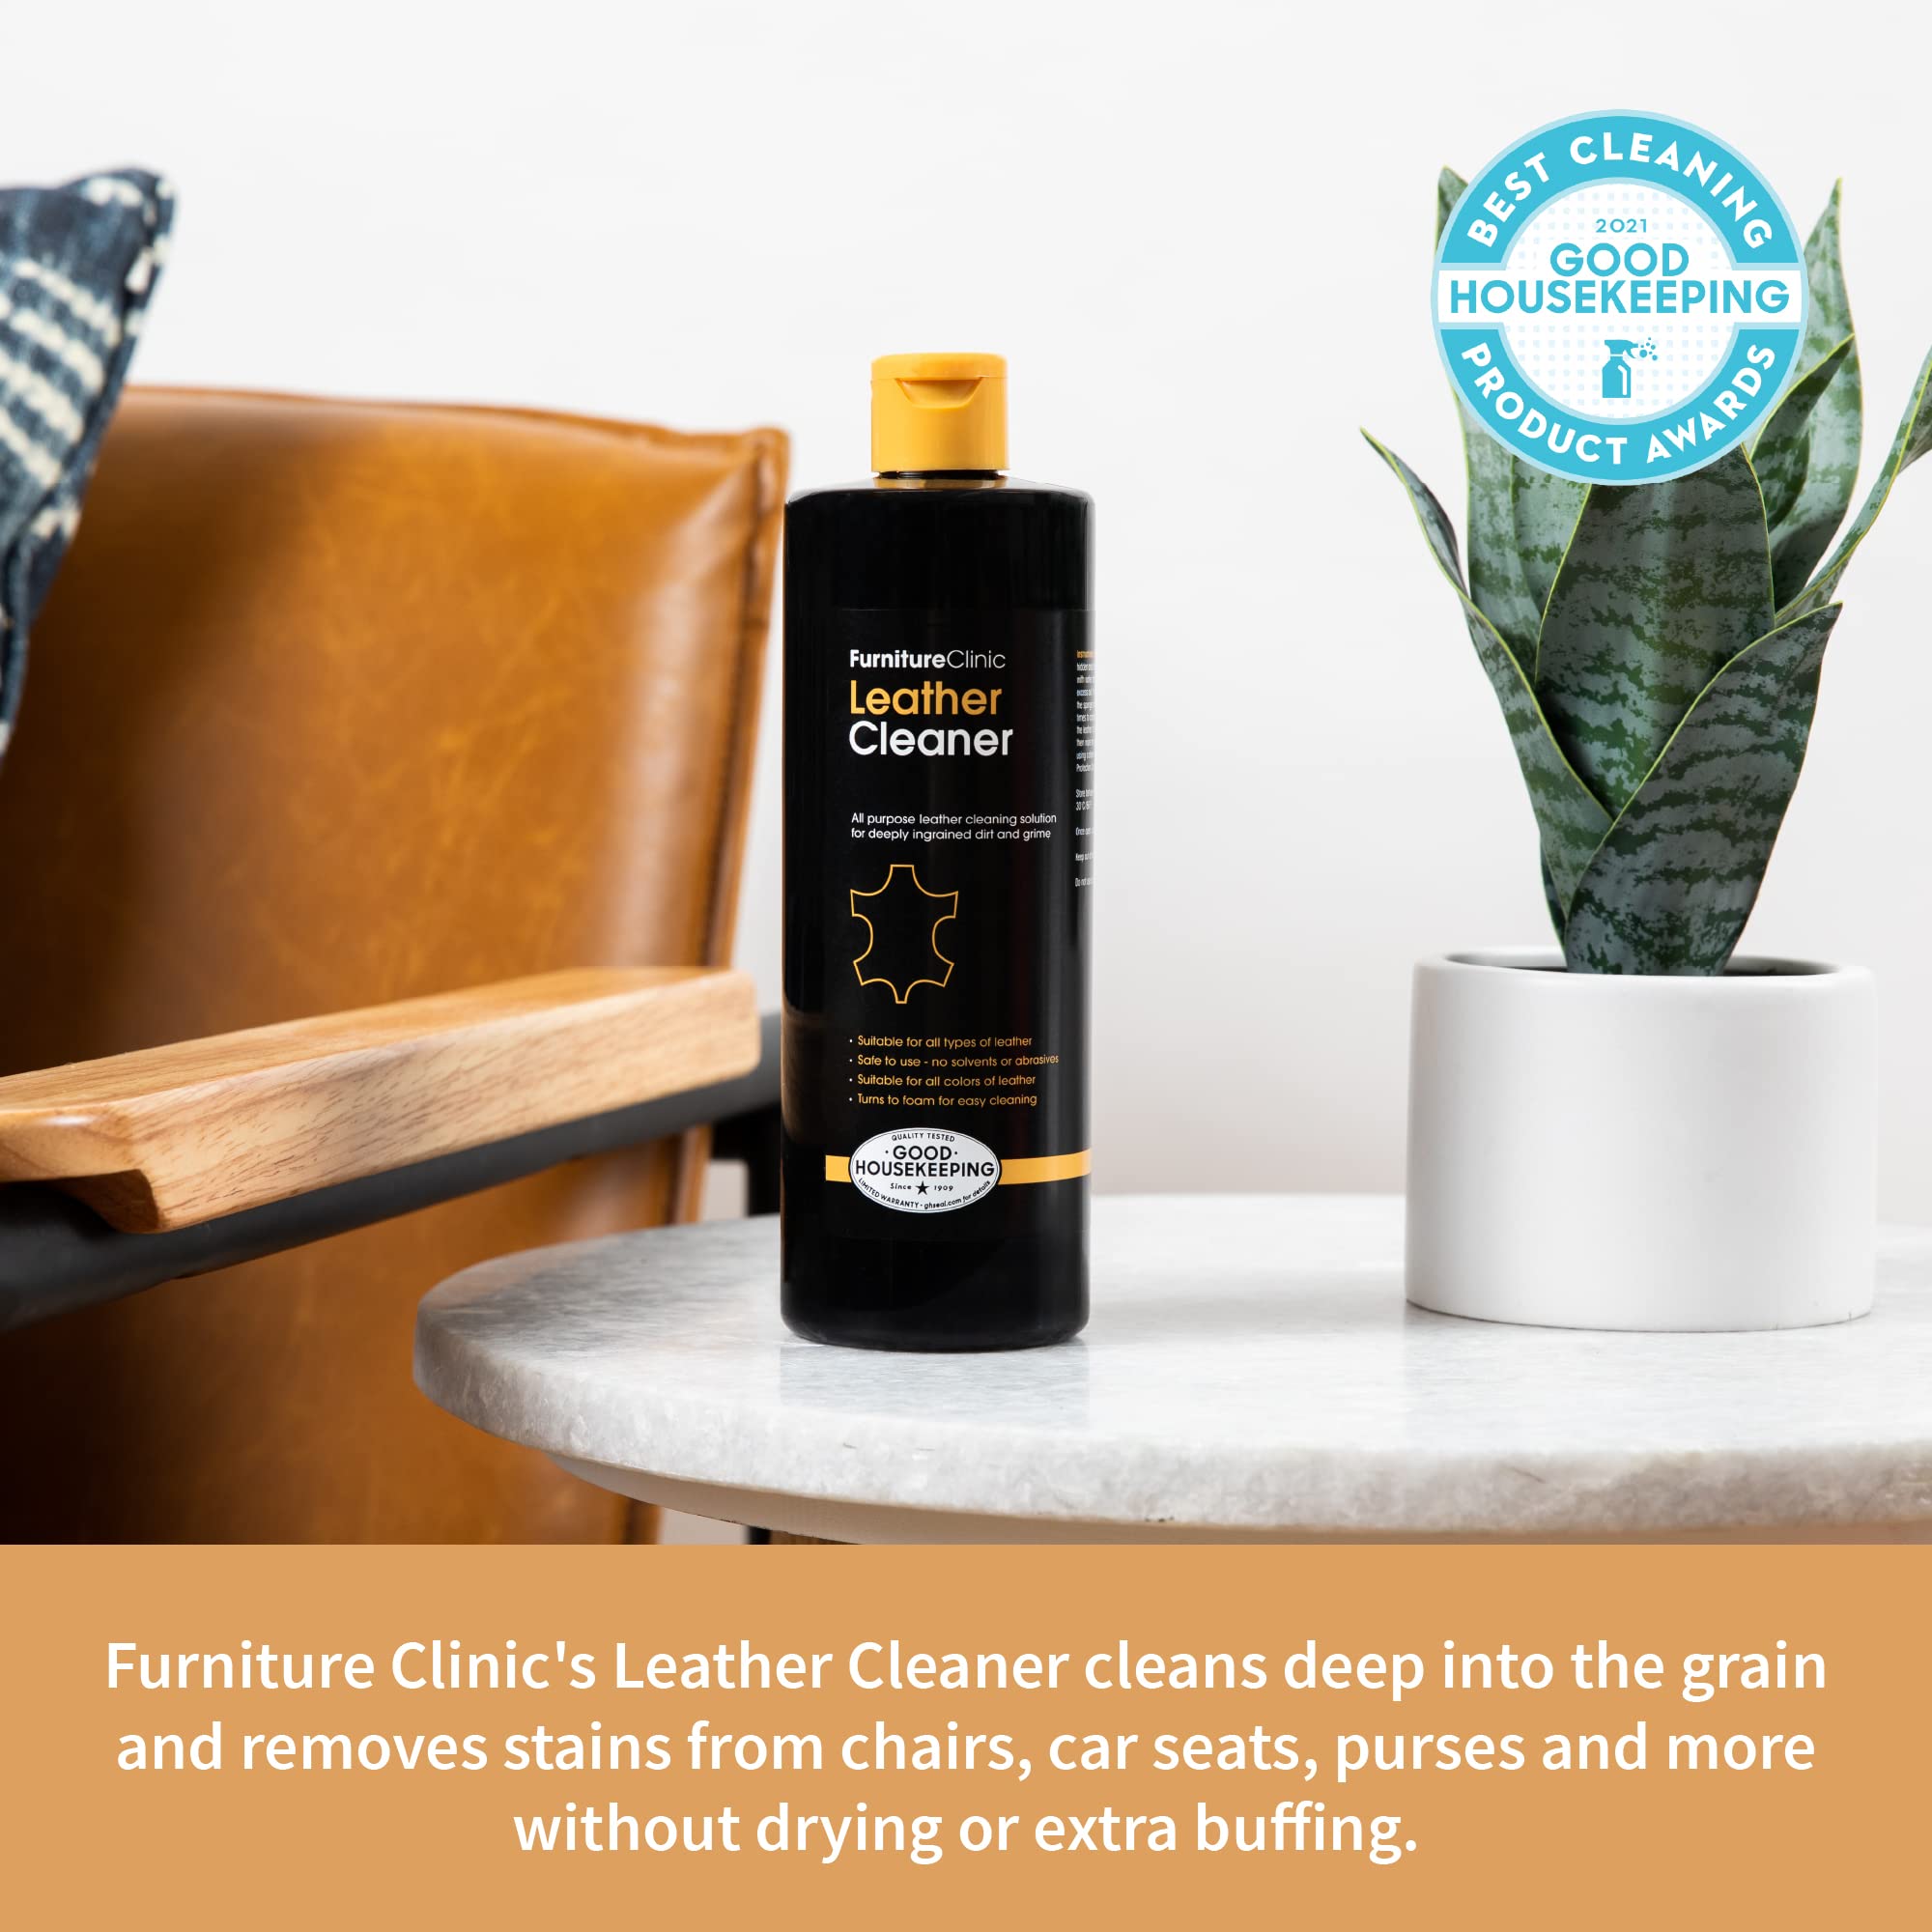 Furniture Clinic Leather Complete Restoration Kit | Includes Leather Recoloring Balm, Leather Cleaner, Protection Cream, Sponge & Cloth | Restores & Repairs (Tan)